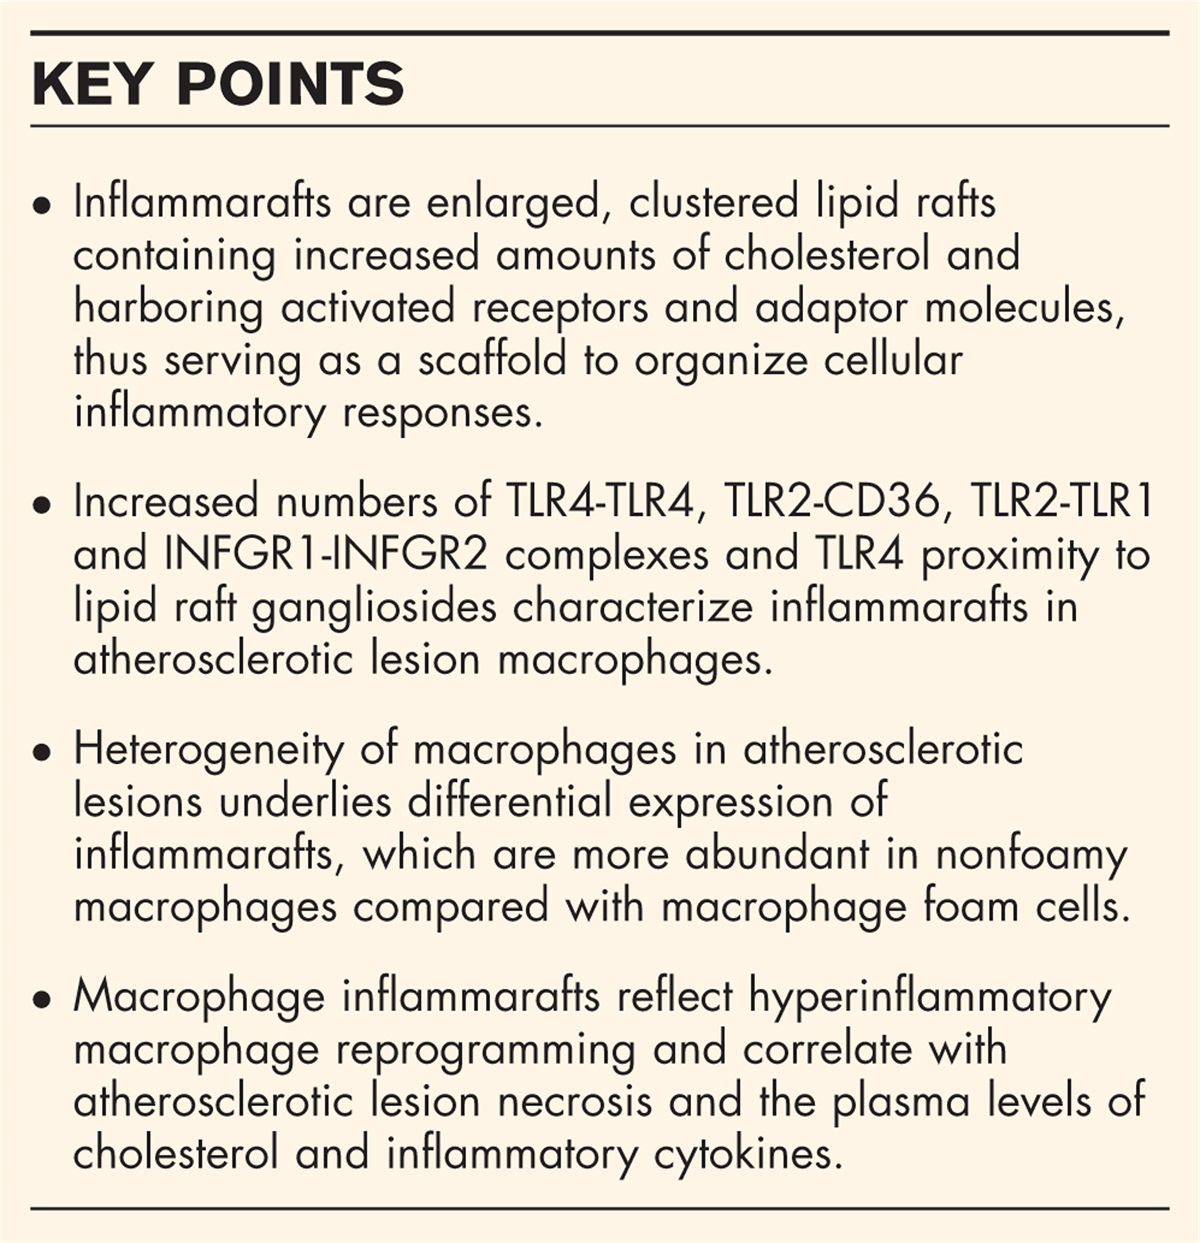 Macrophage inflammarafts in atherosclerosis